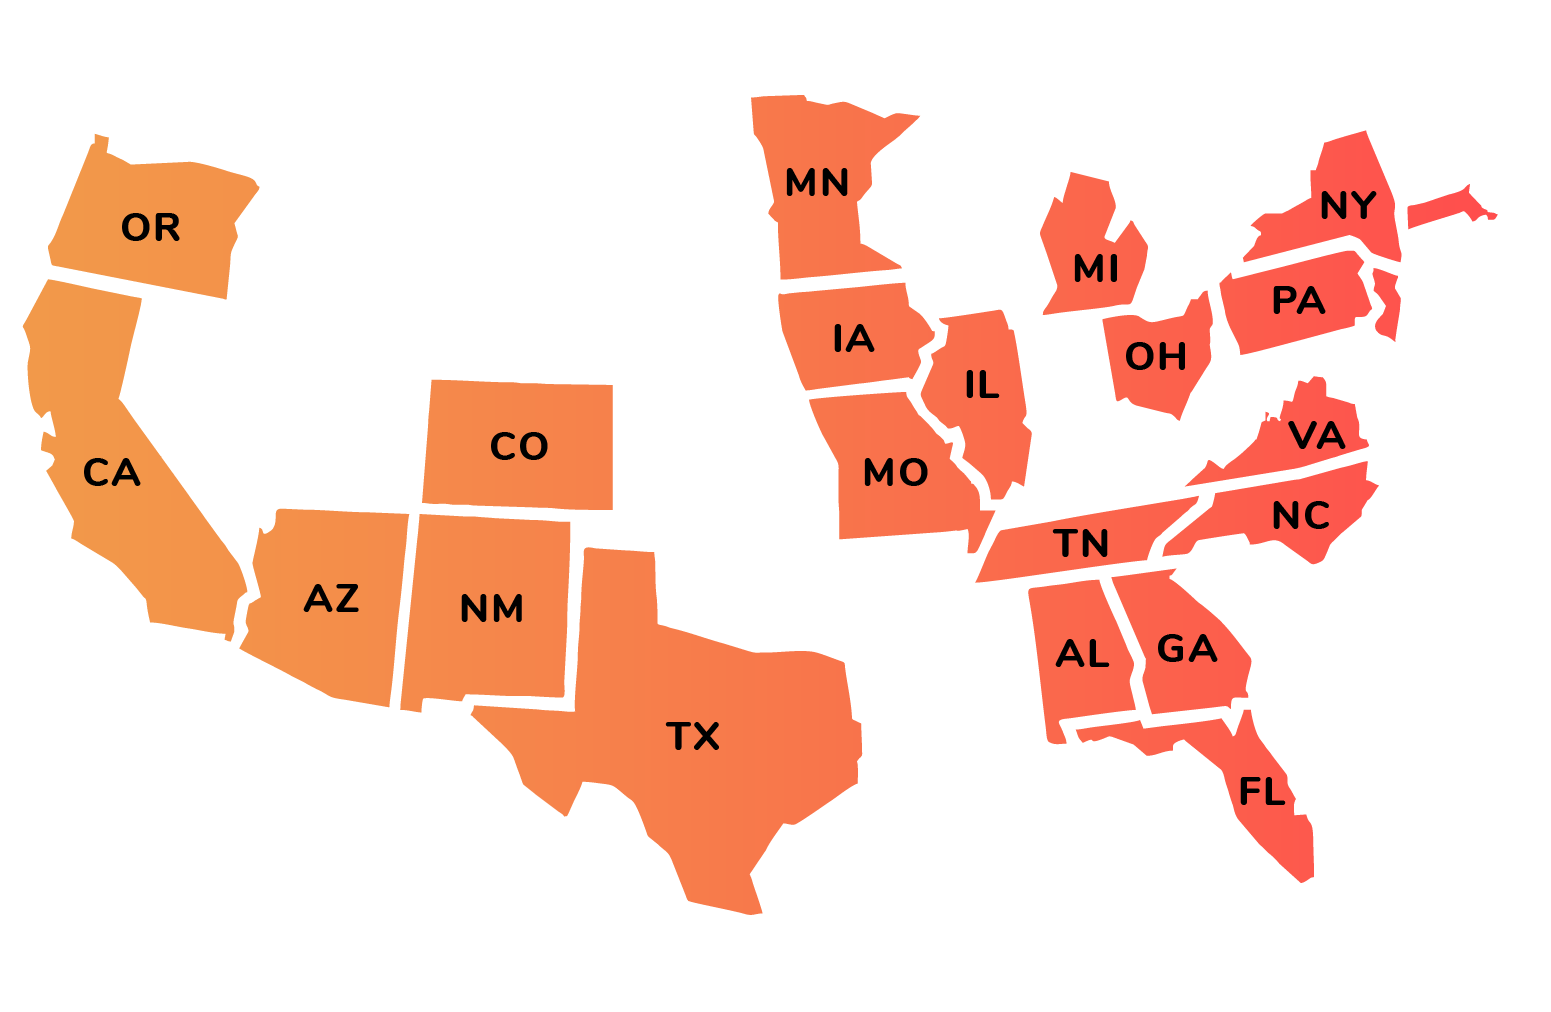 US states we work in